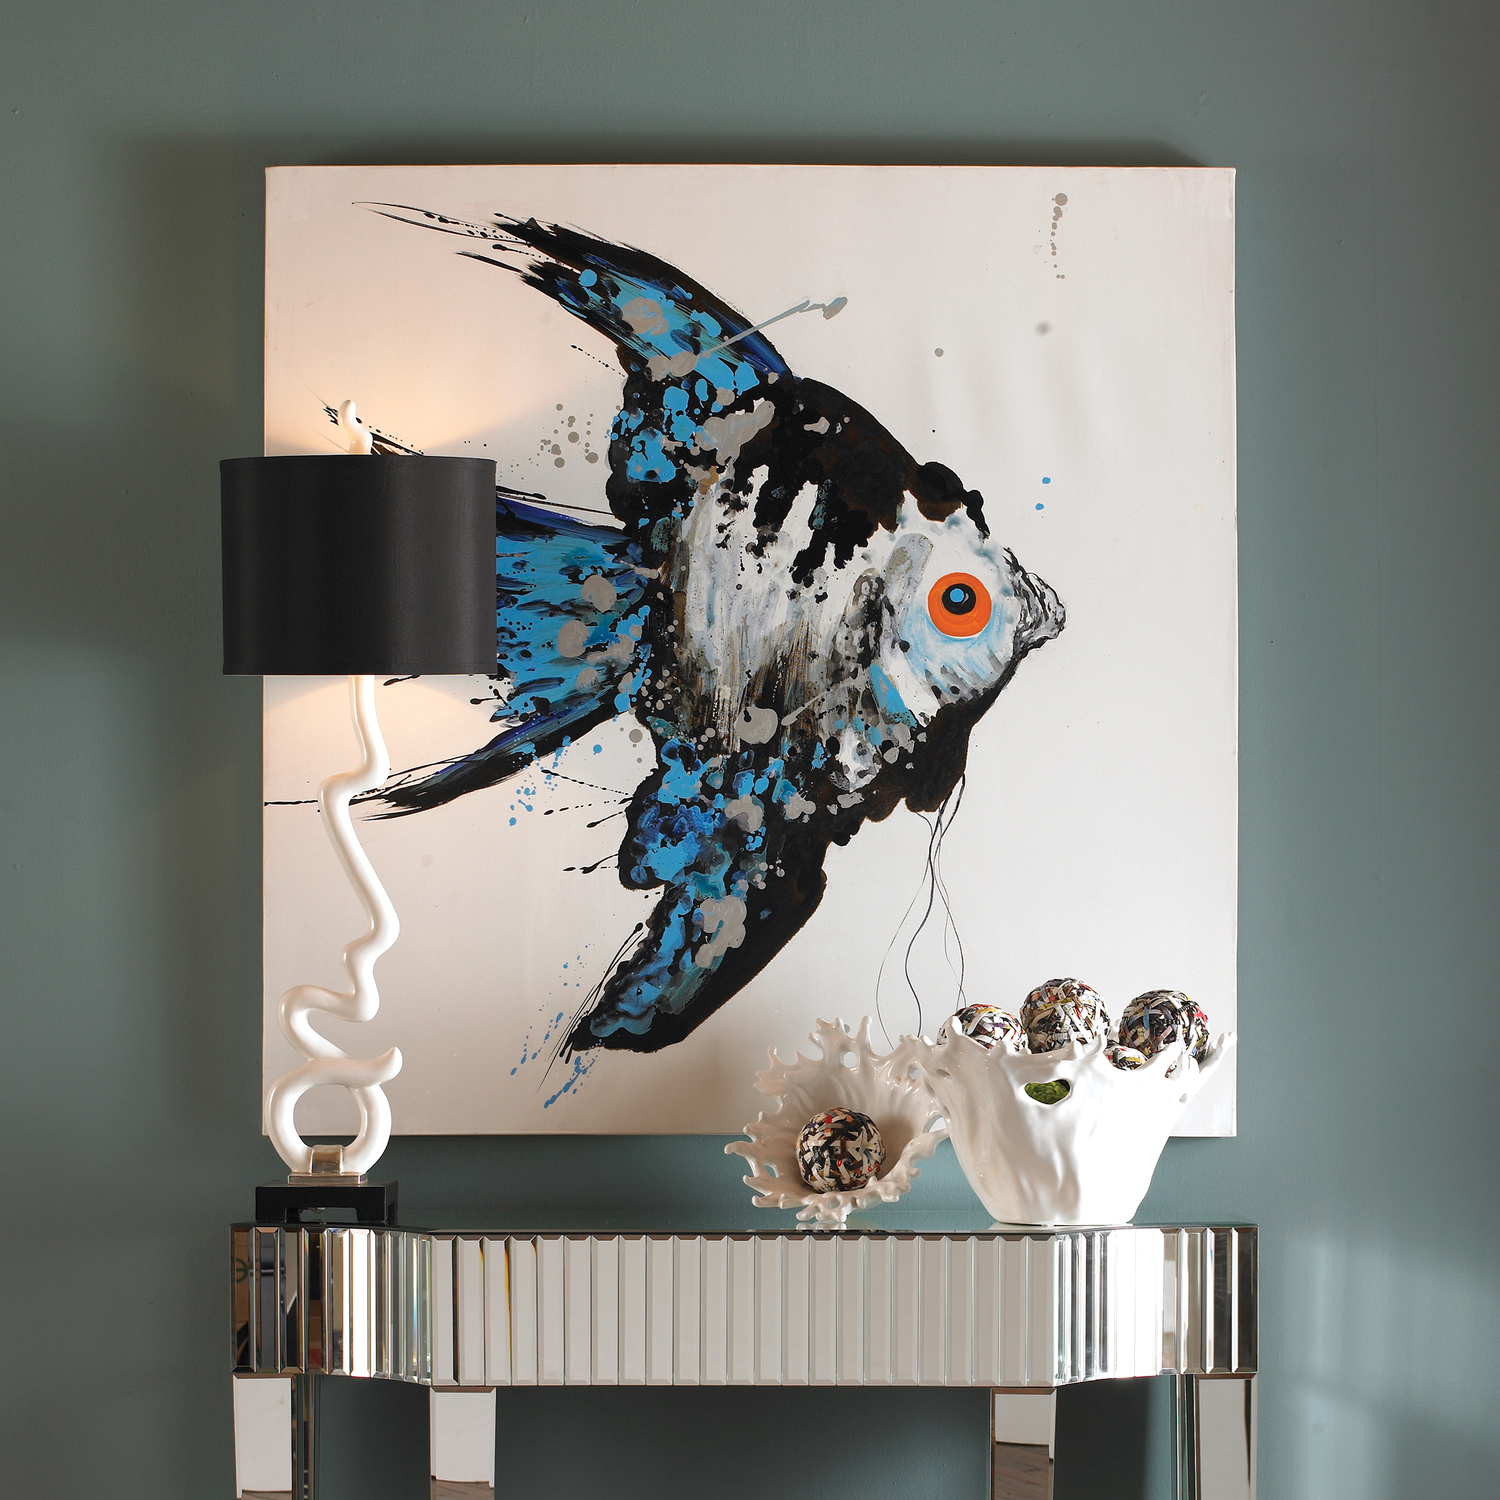 Uttermost Fish Art Wall Art Hand Painted On Canvas Over Wooden Stretchers. Grace Feyock